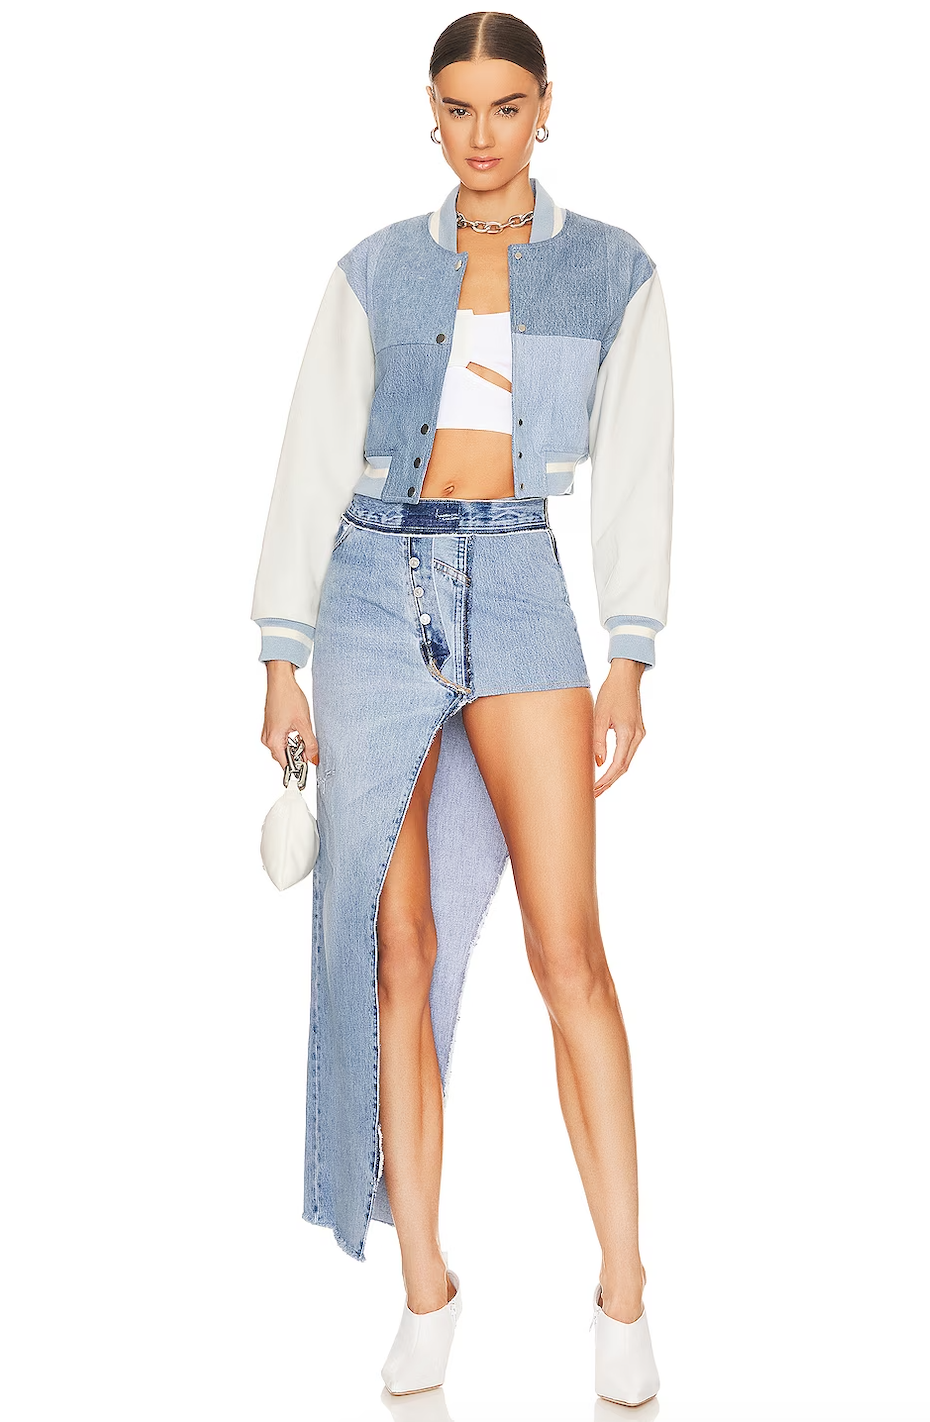 Denim Reloaded: Discover the Hottest Non-Jean Styles Taking Over the Fashion Scene